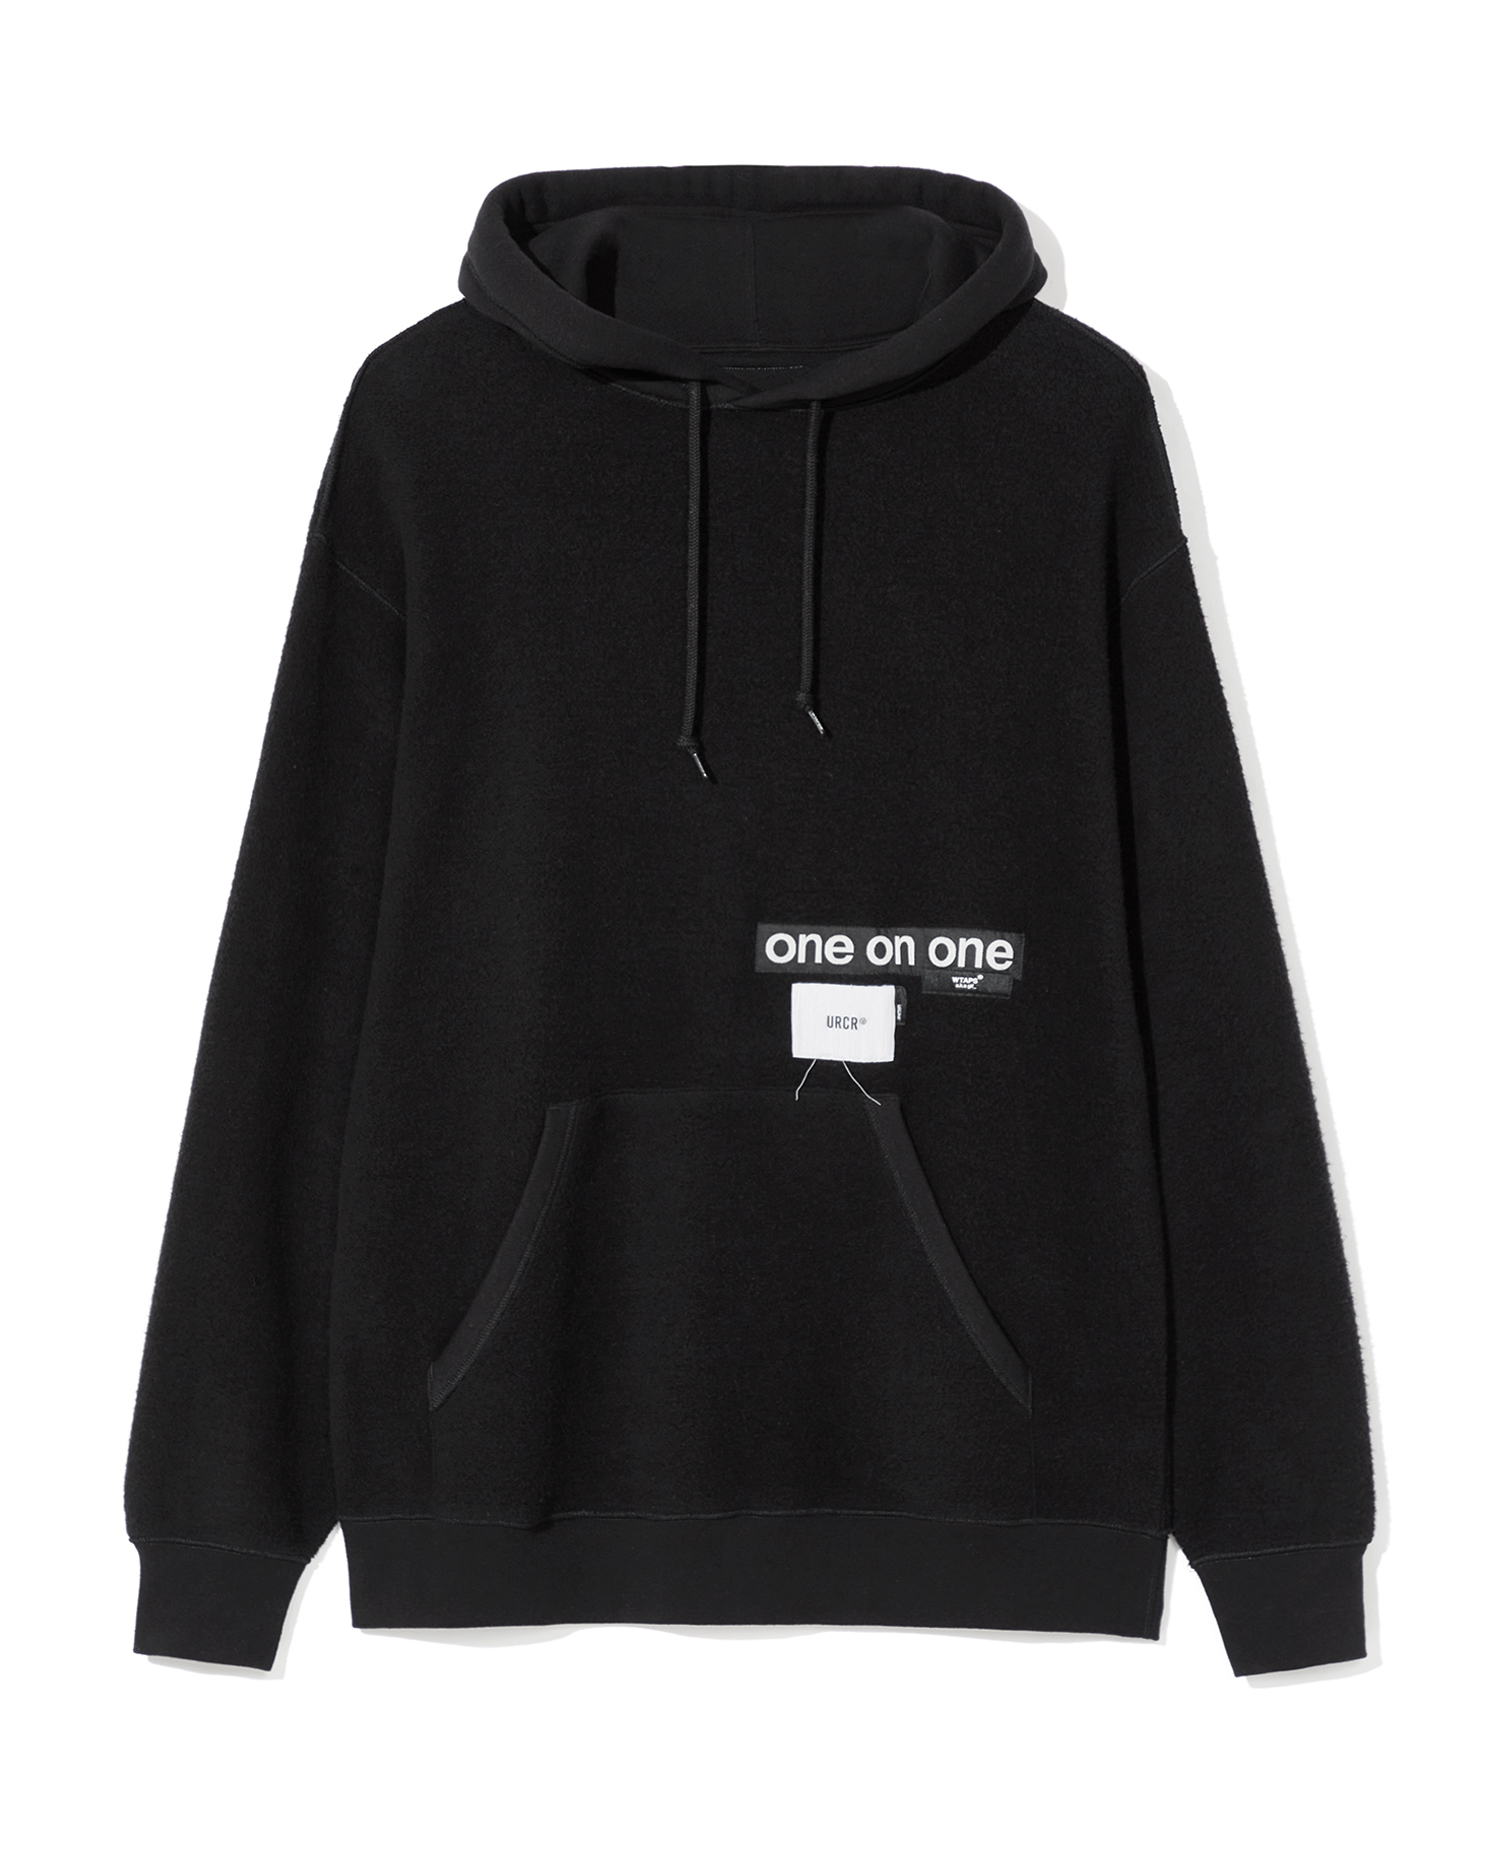 GIG / HOODED / COTTON. UNDERCOVER  L